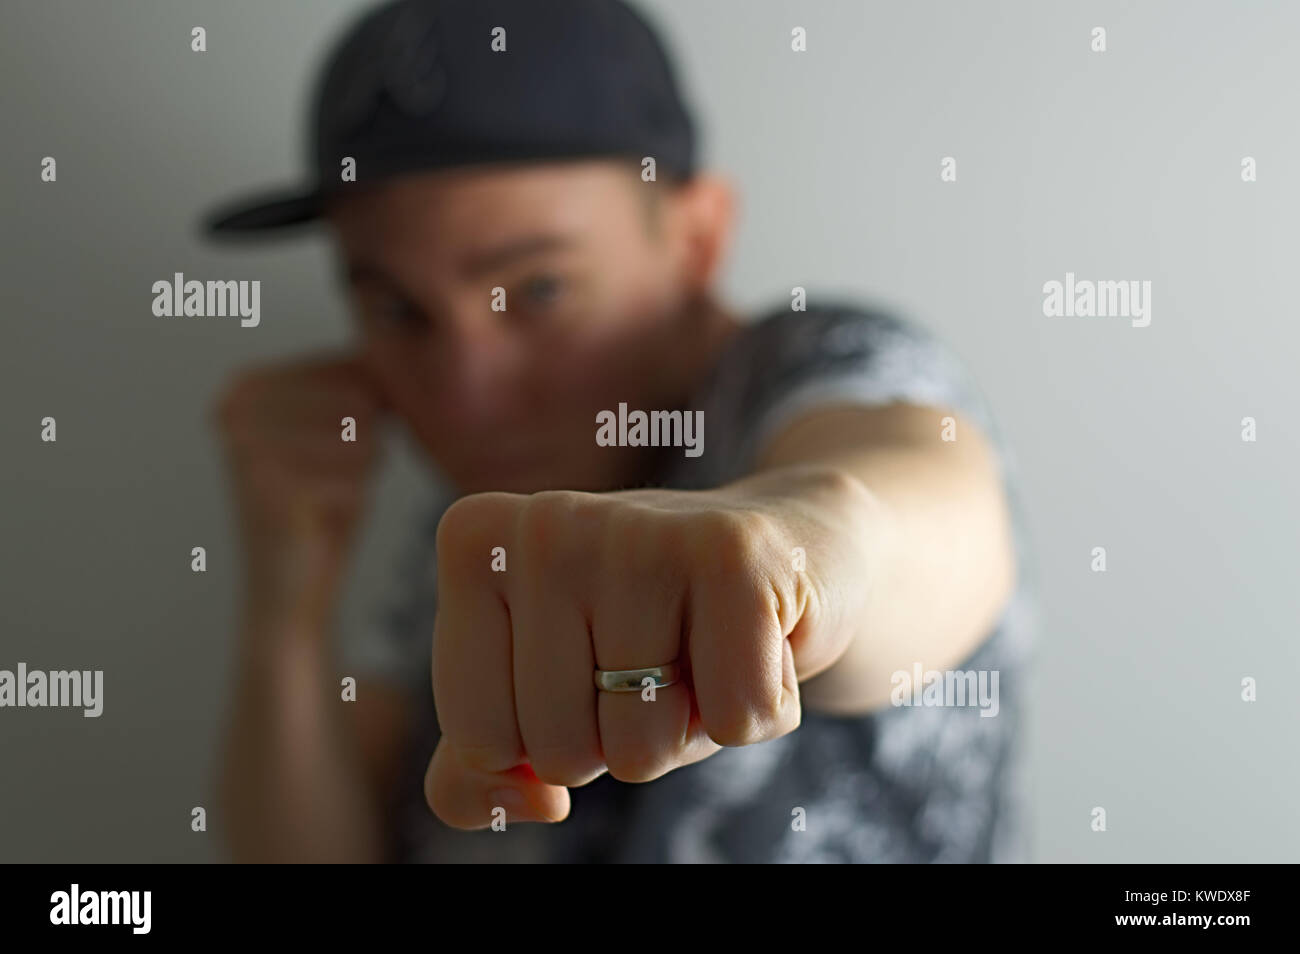 Man wearing baseball cap and wedding ring punching towards camera with only  his fist in focus Stock Photo - Alamy